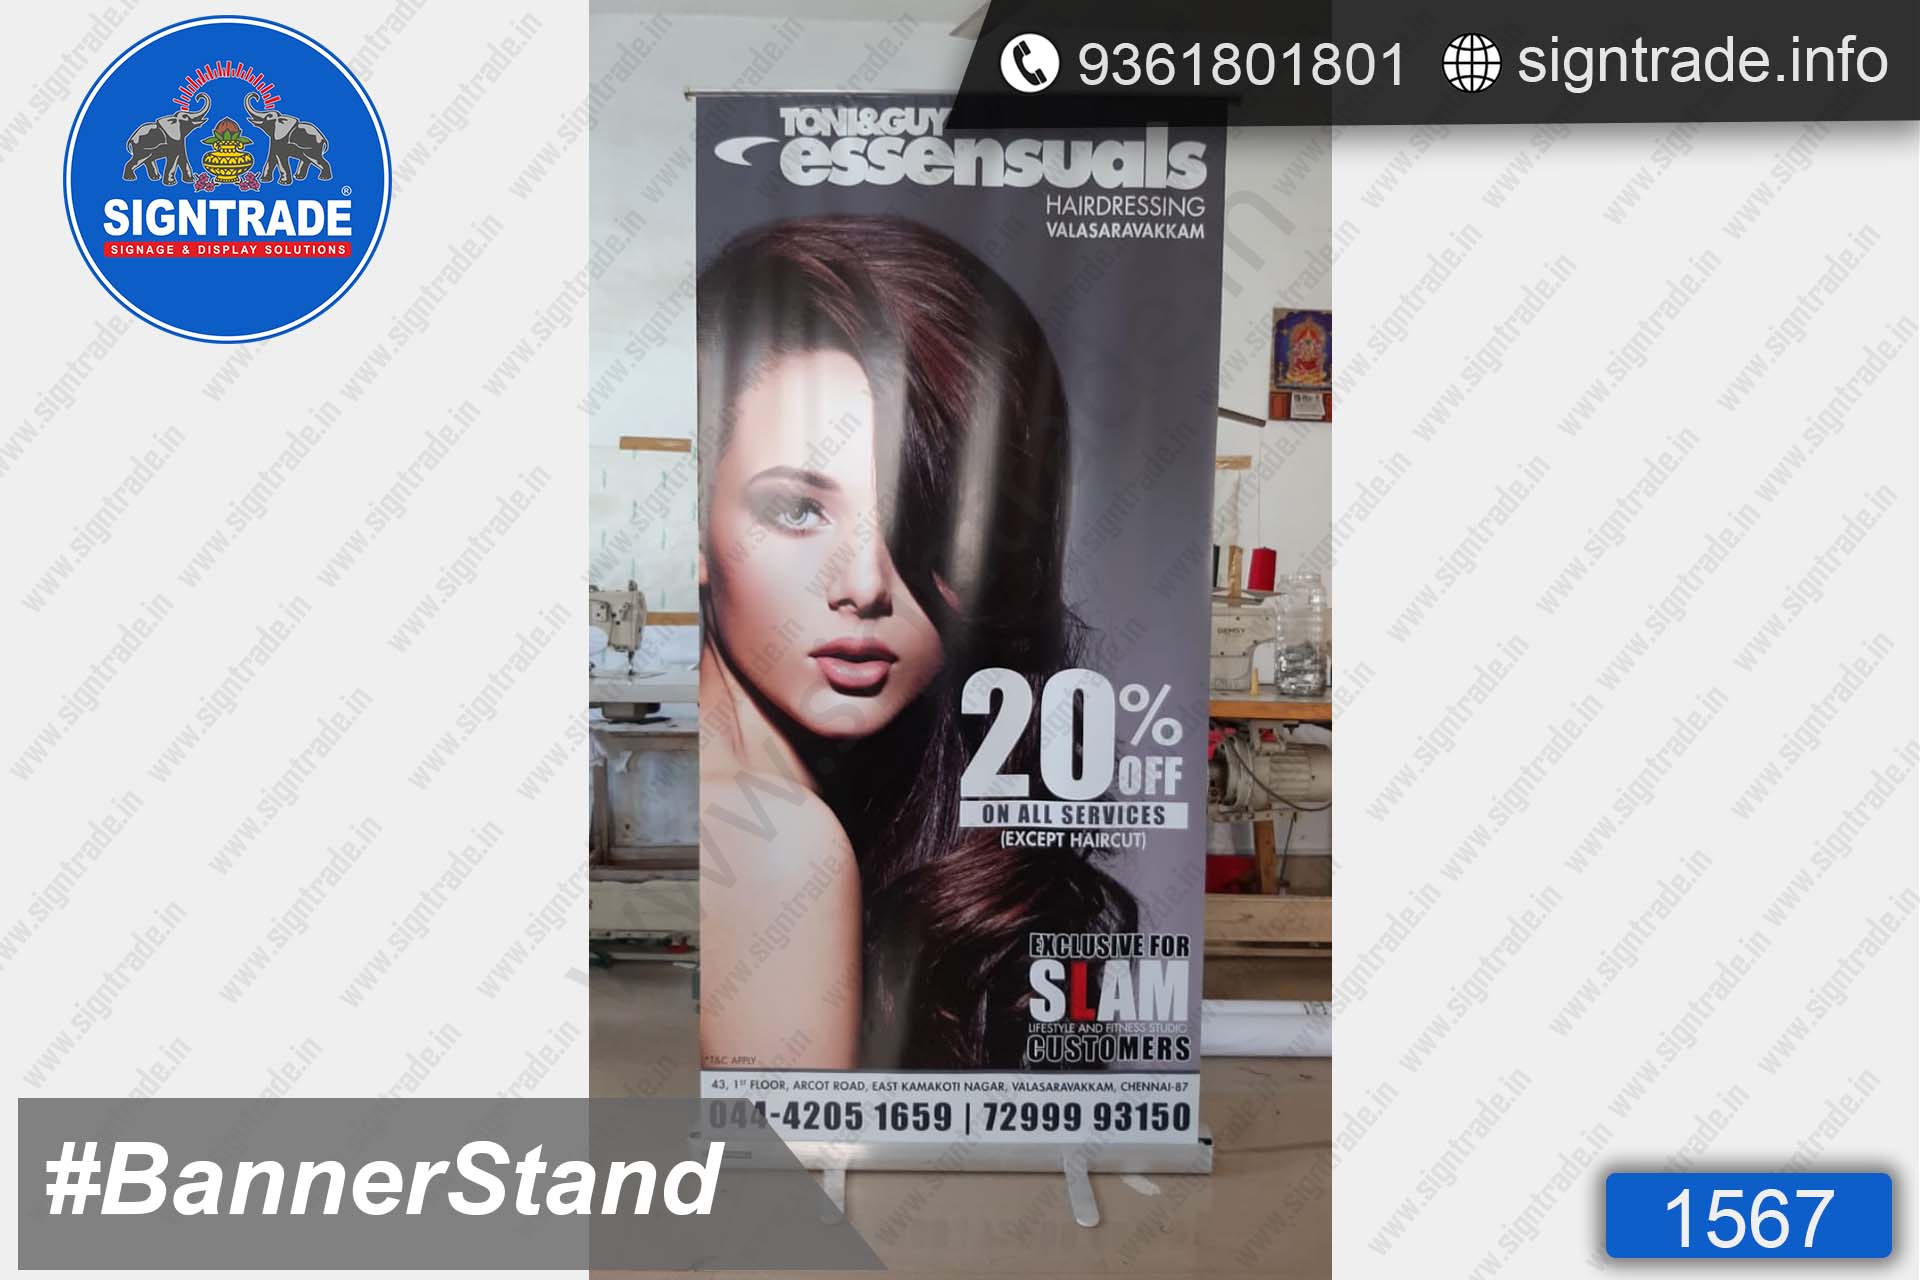 Toni&Guy Essensuals Hairdressing, Valasaravakkam, Chennai - SIGNTRADE - Roll Up Banner Stand Manufacturers in Chennai